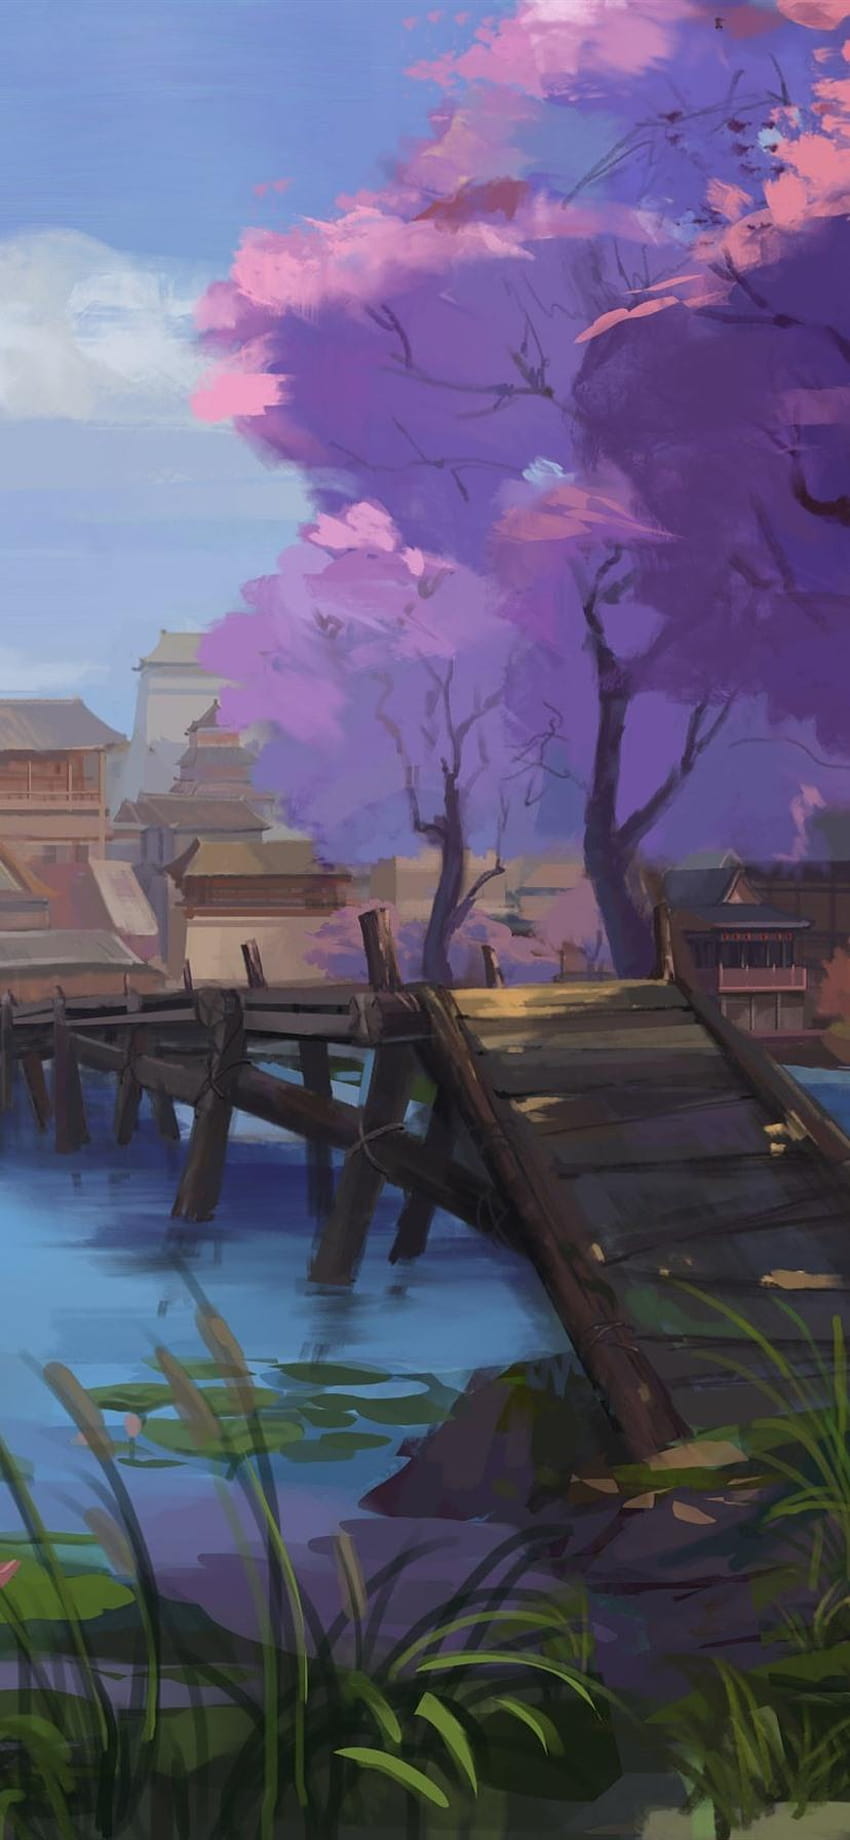 Watercolor painting, China, village, retro style 828x1792 iPhone XR HD phone wallpaper